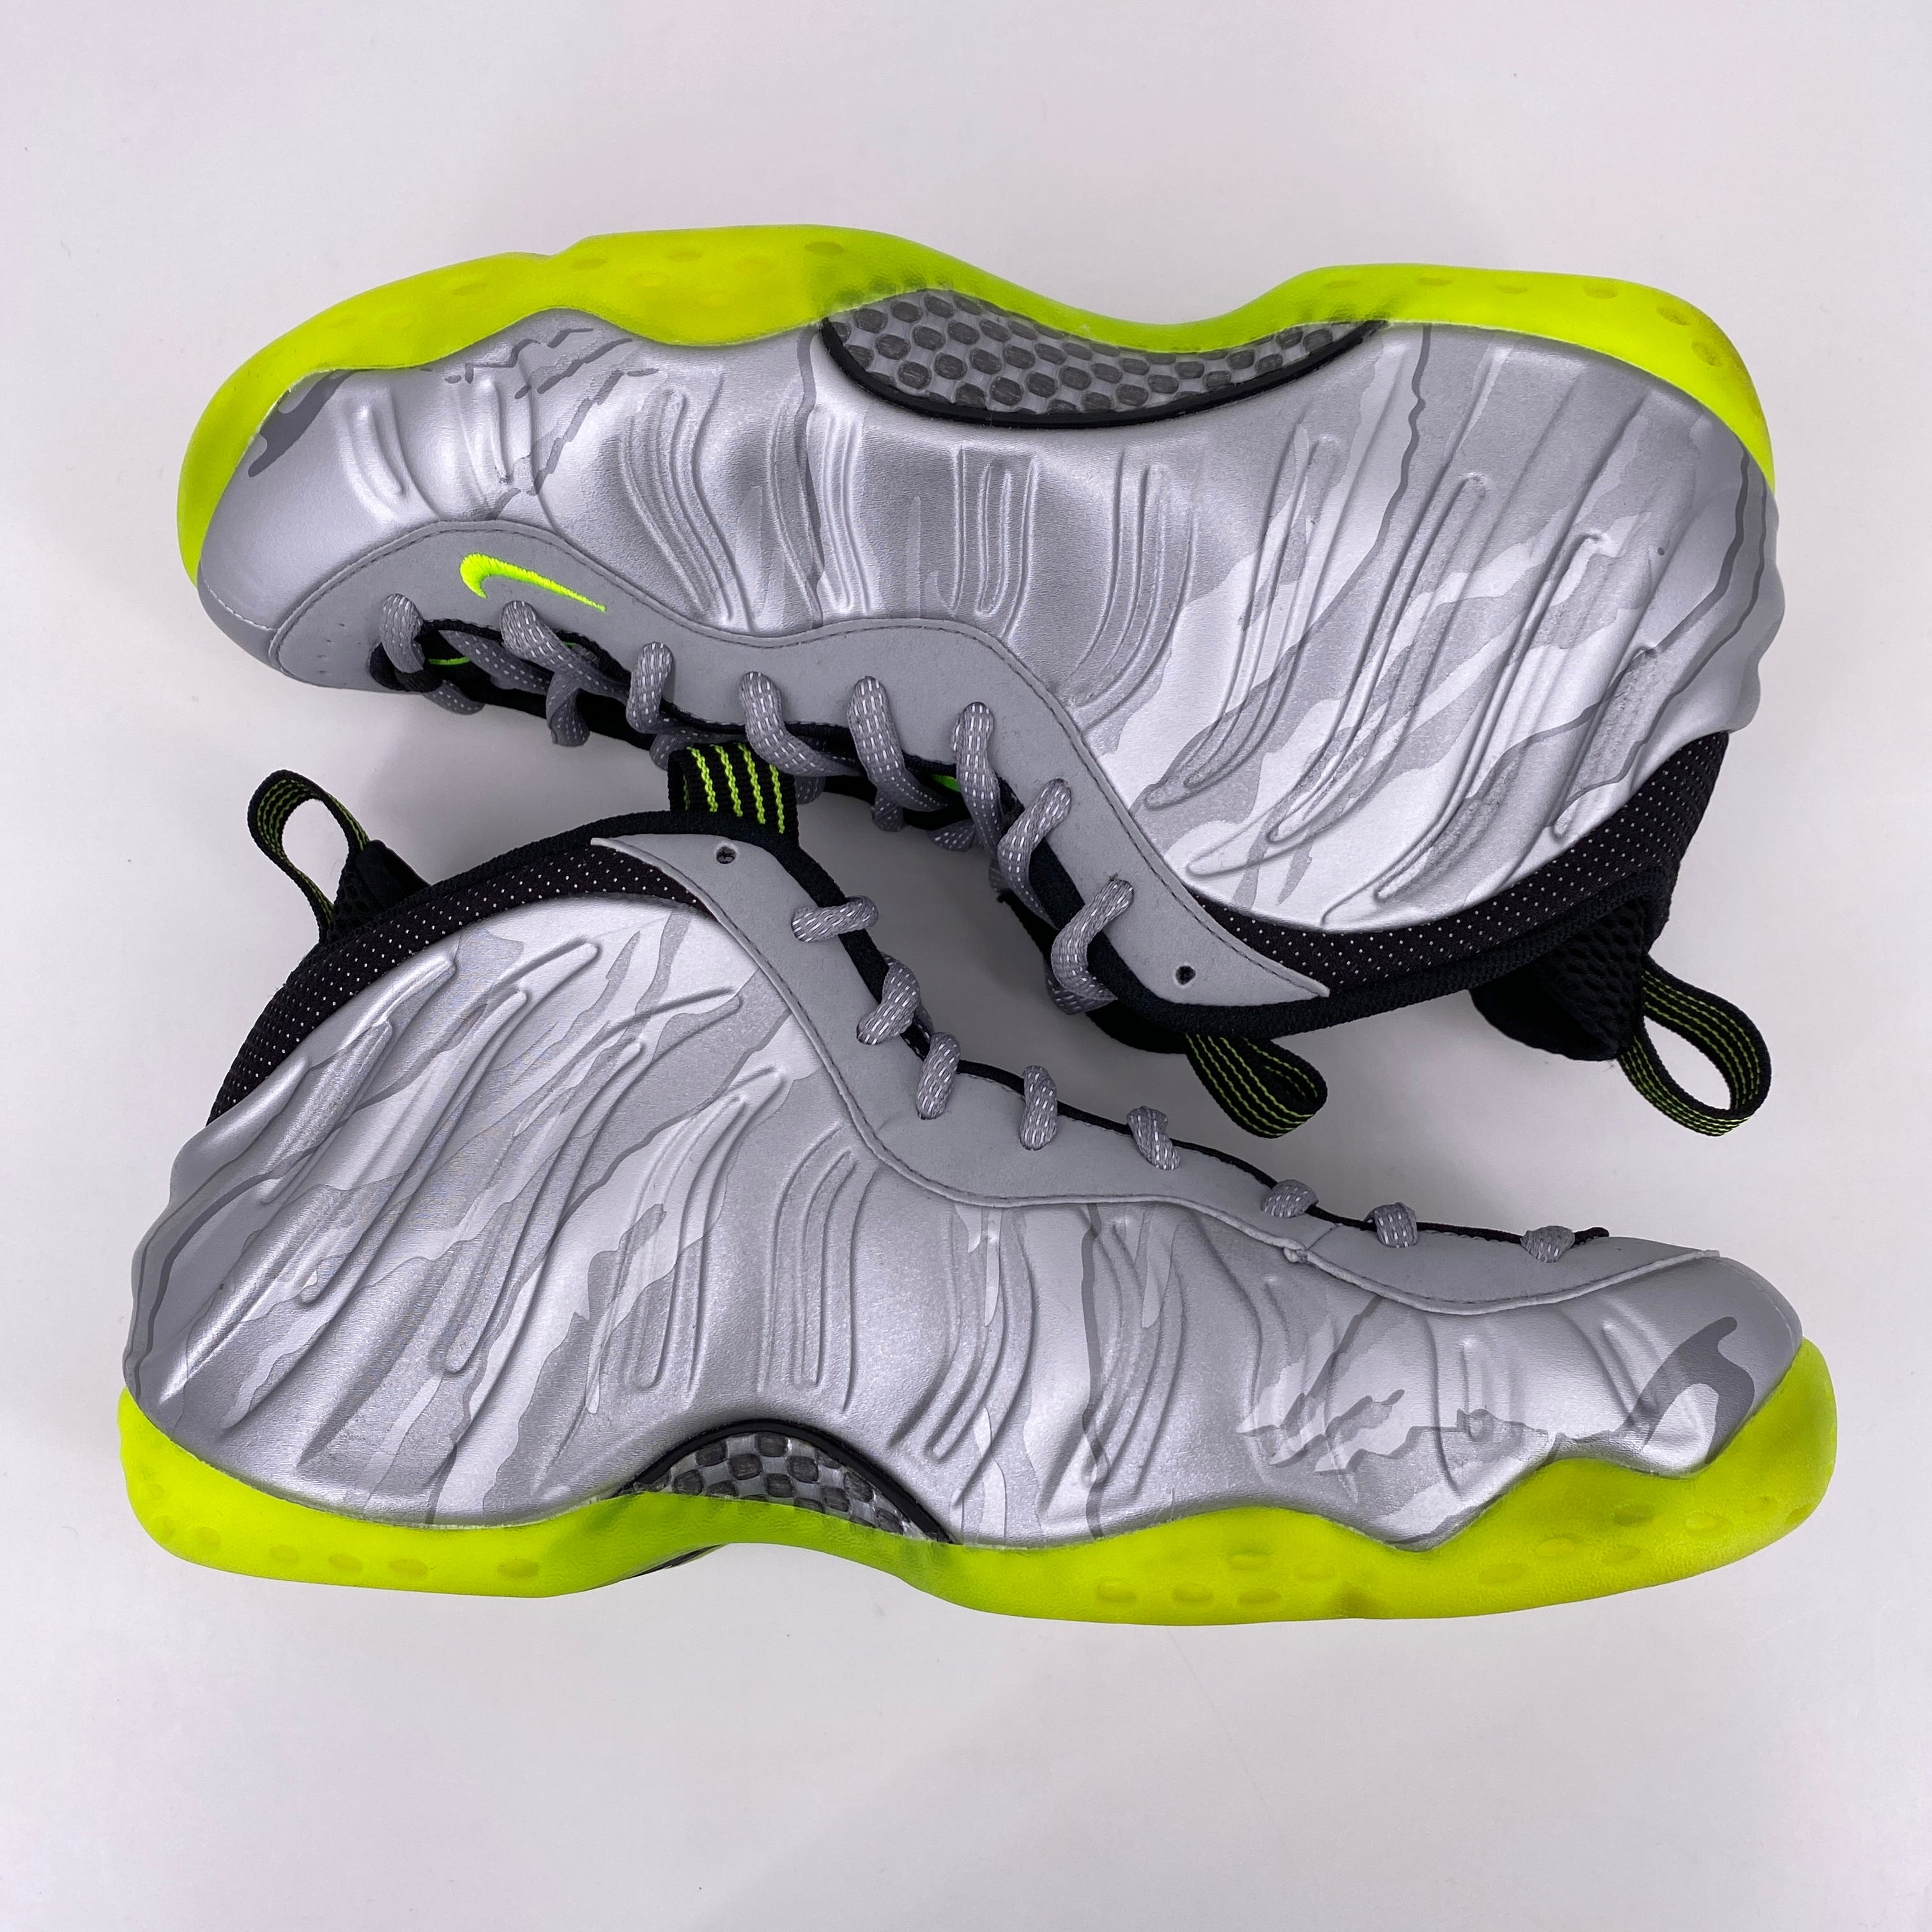 Nike Air Foamposite One "Silver Volt Camo" 2014 Used Size 10